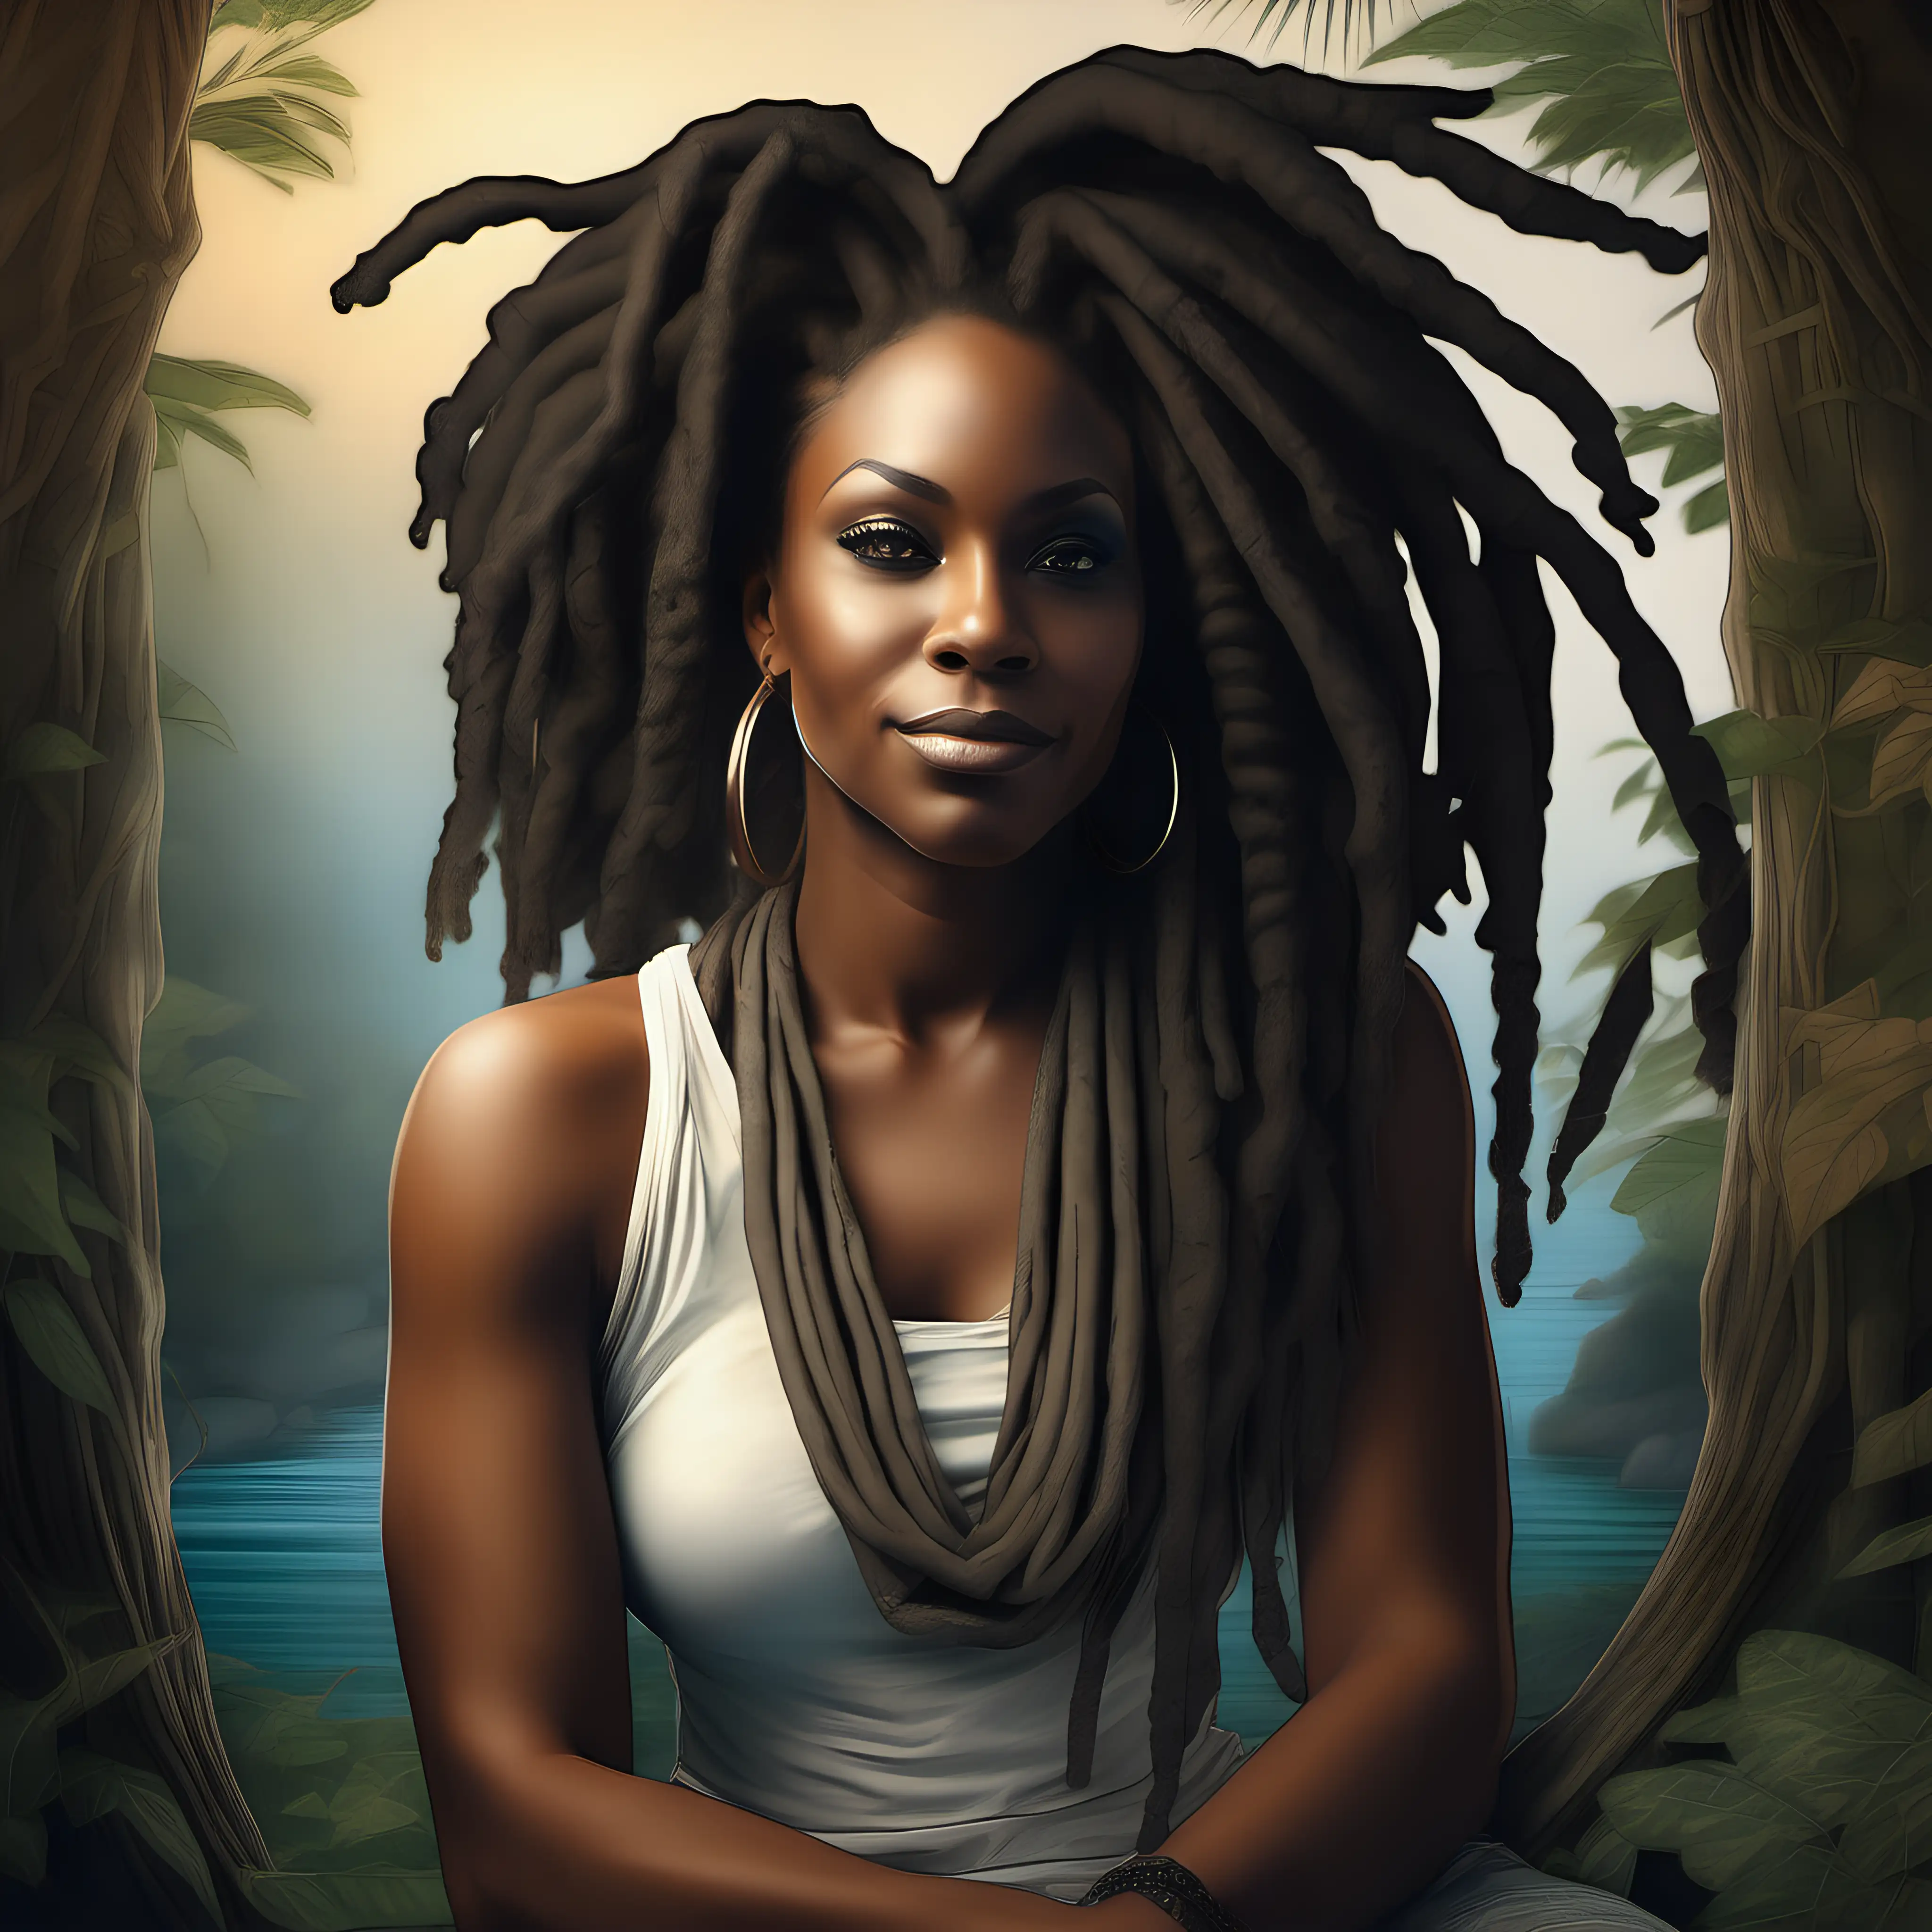 "Capture the essence of a serene moment in the life of a confident Black woman, aged 30-45, as she unwinds and finds tranquility in her surroundings. Highlight the beauty of her dreadlocks and the grace with which she embraces relaxation. Consider the setting, emotions, and details that reflect a peaceful and empowering scene."